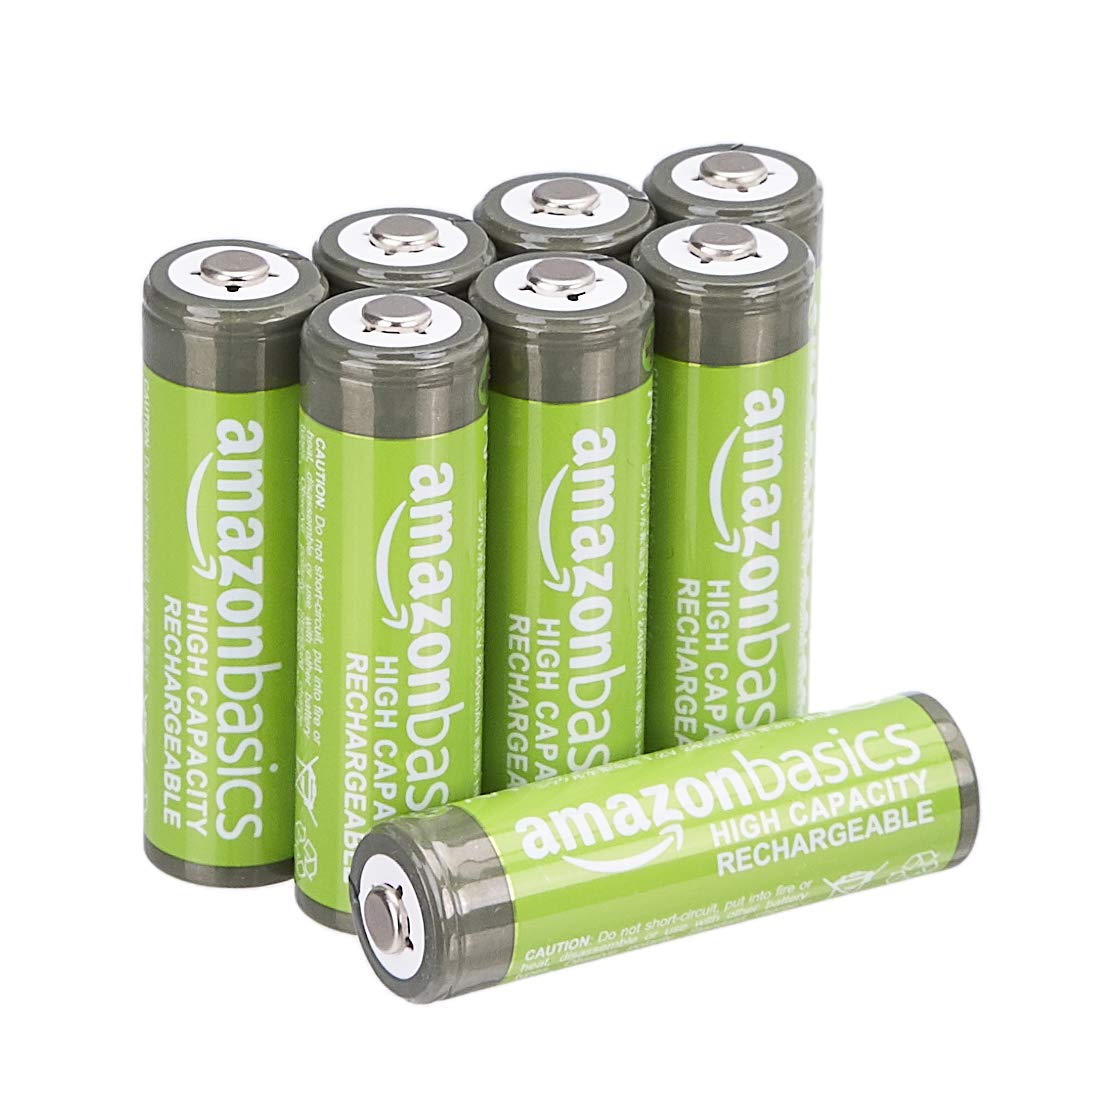 Amazon Basics 8-Pack AAA Rechargeable Batteries, 800 mAh, Pre-Charged & AA High-Capacity Ni-MH Rechargeable Batteries (2400 mAh), Pre-Charged - Pack of 8